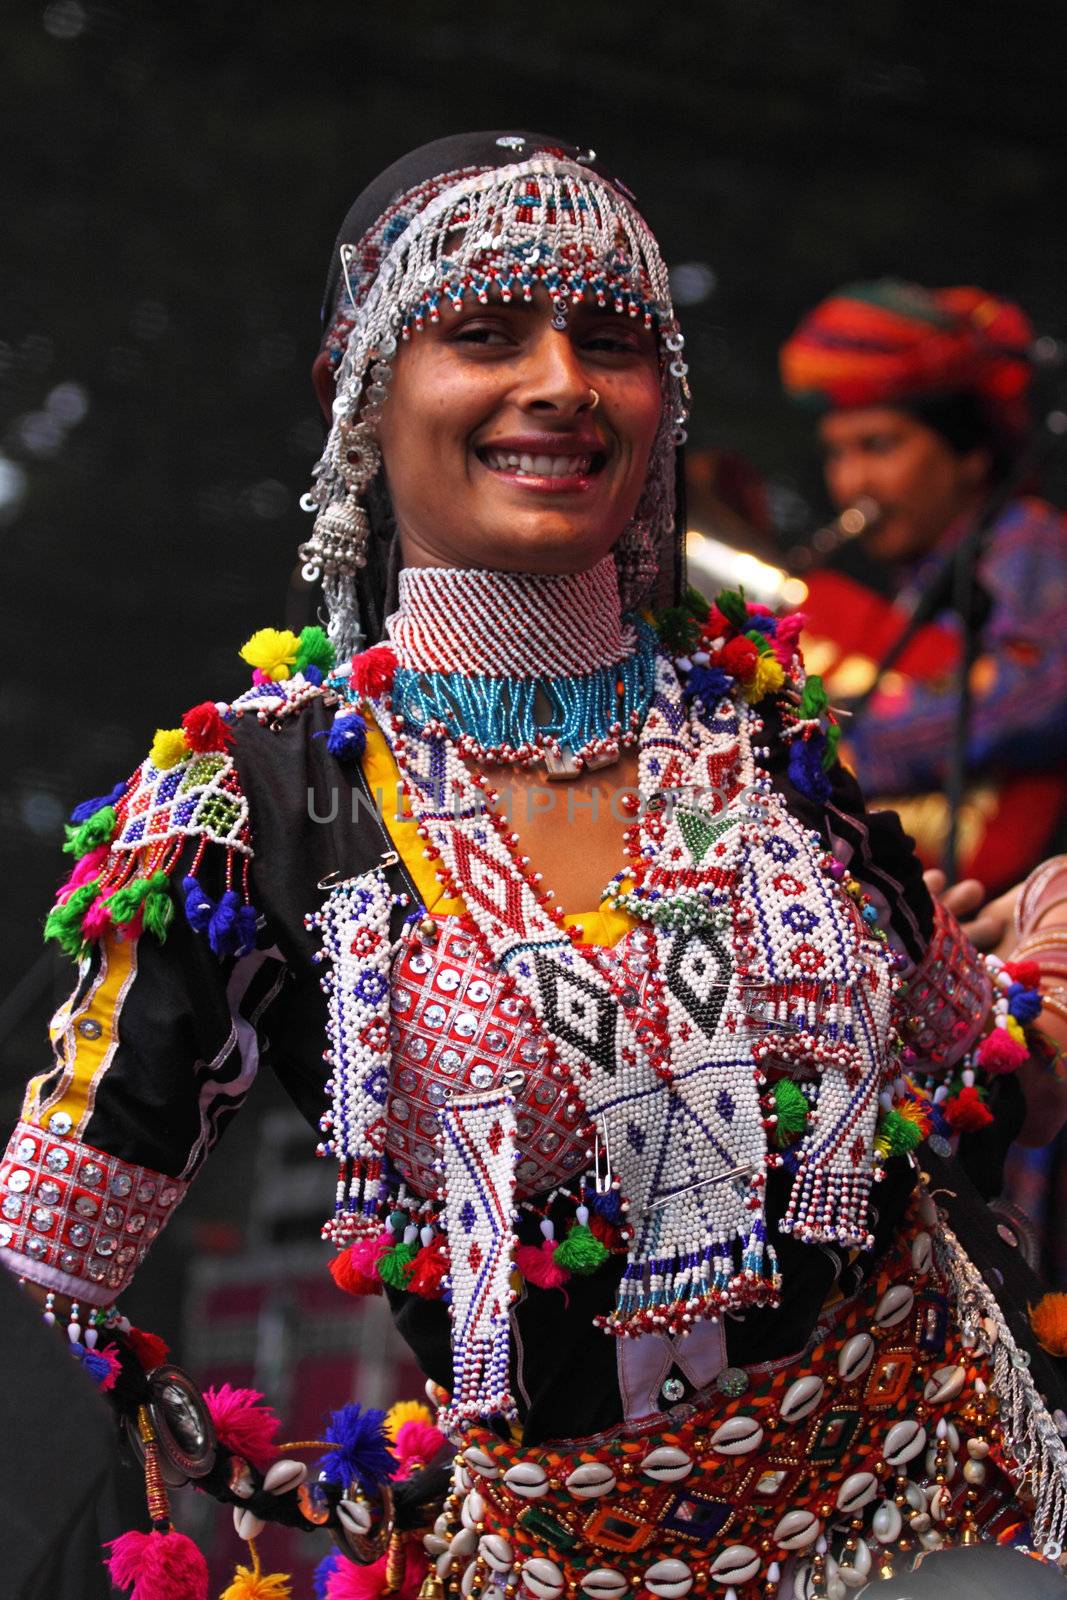 BRISTOL, ENGLAND - JULY 31: Dancer with the Jaipur Kawa brass band performing at the Harbour Festival in Bristol, England on July 31, 2010. Founded in 1971, this free three day event played host to more than 250,000 spectators